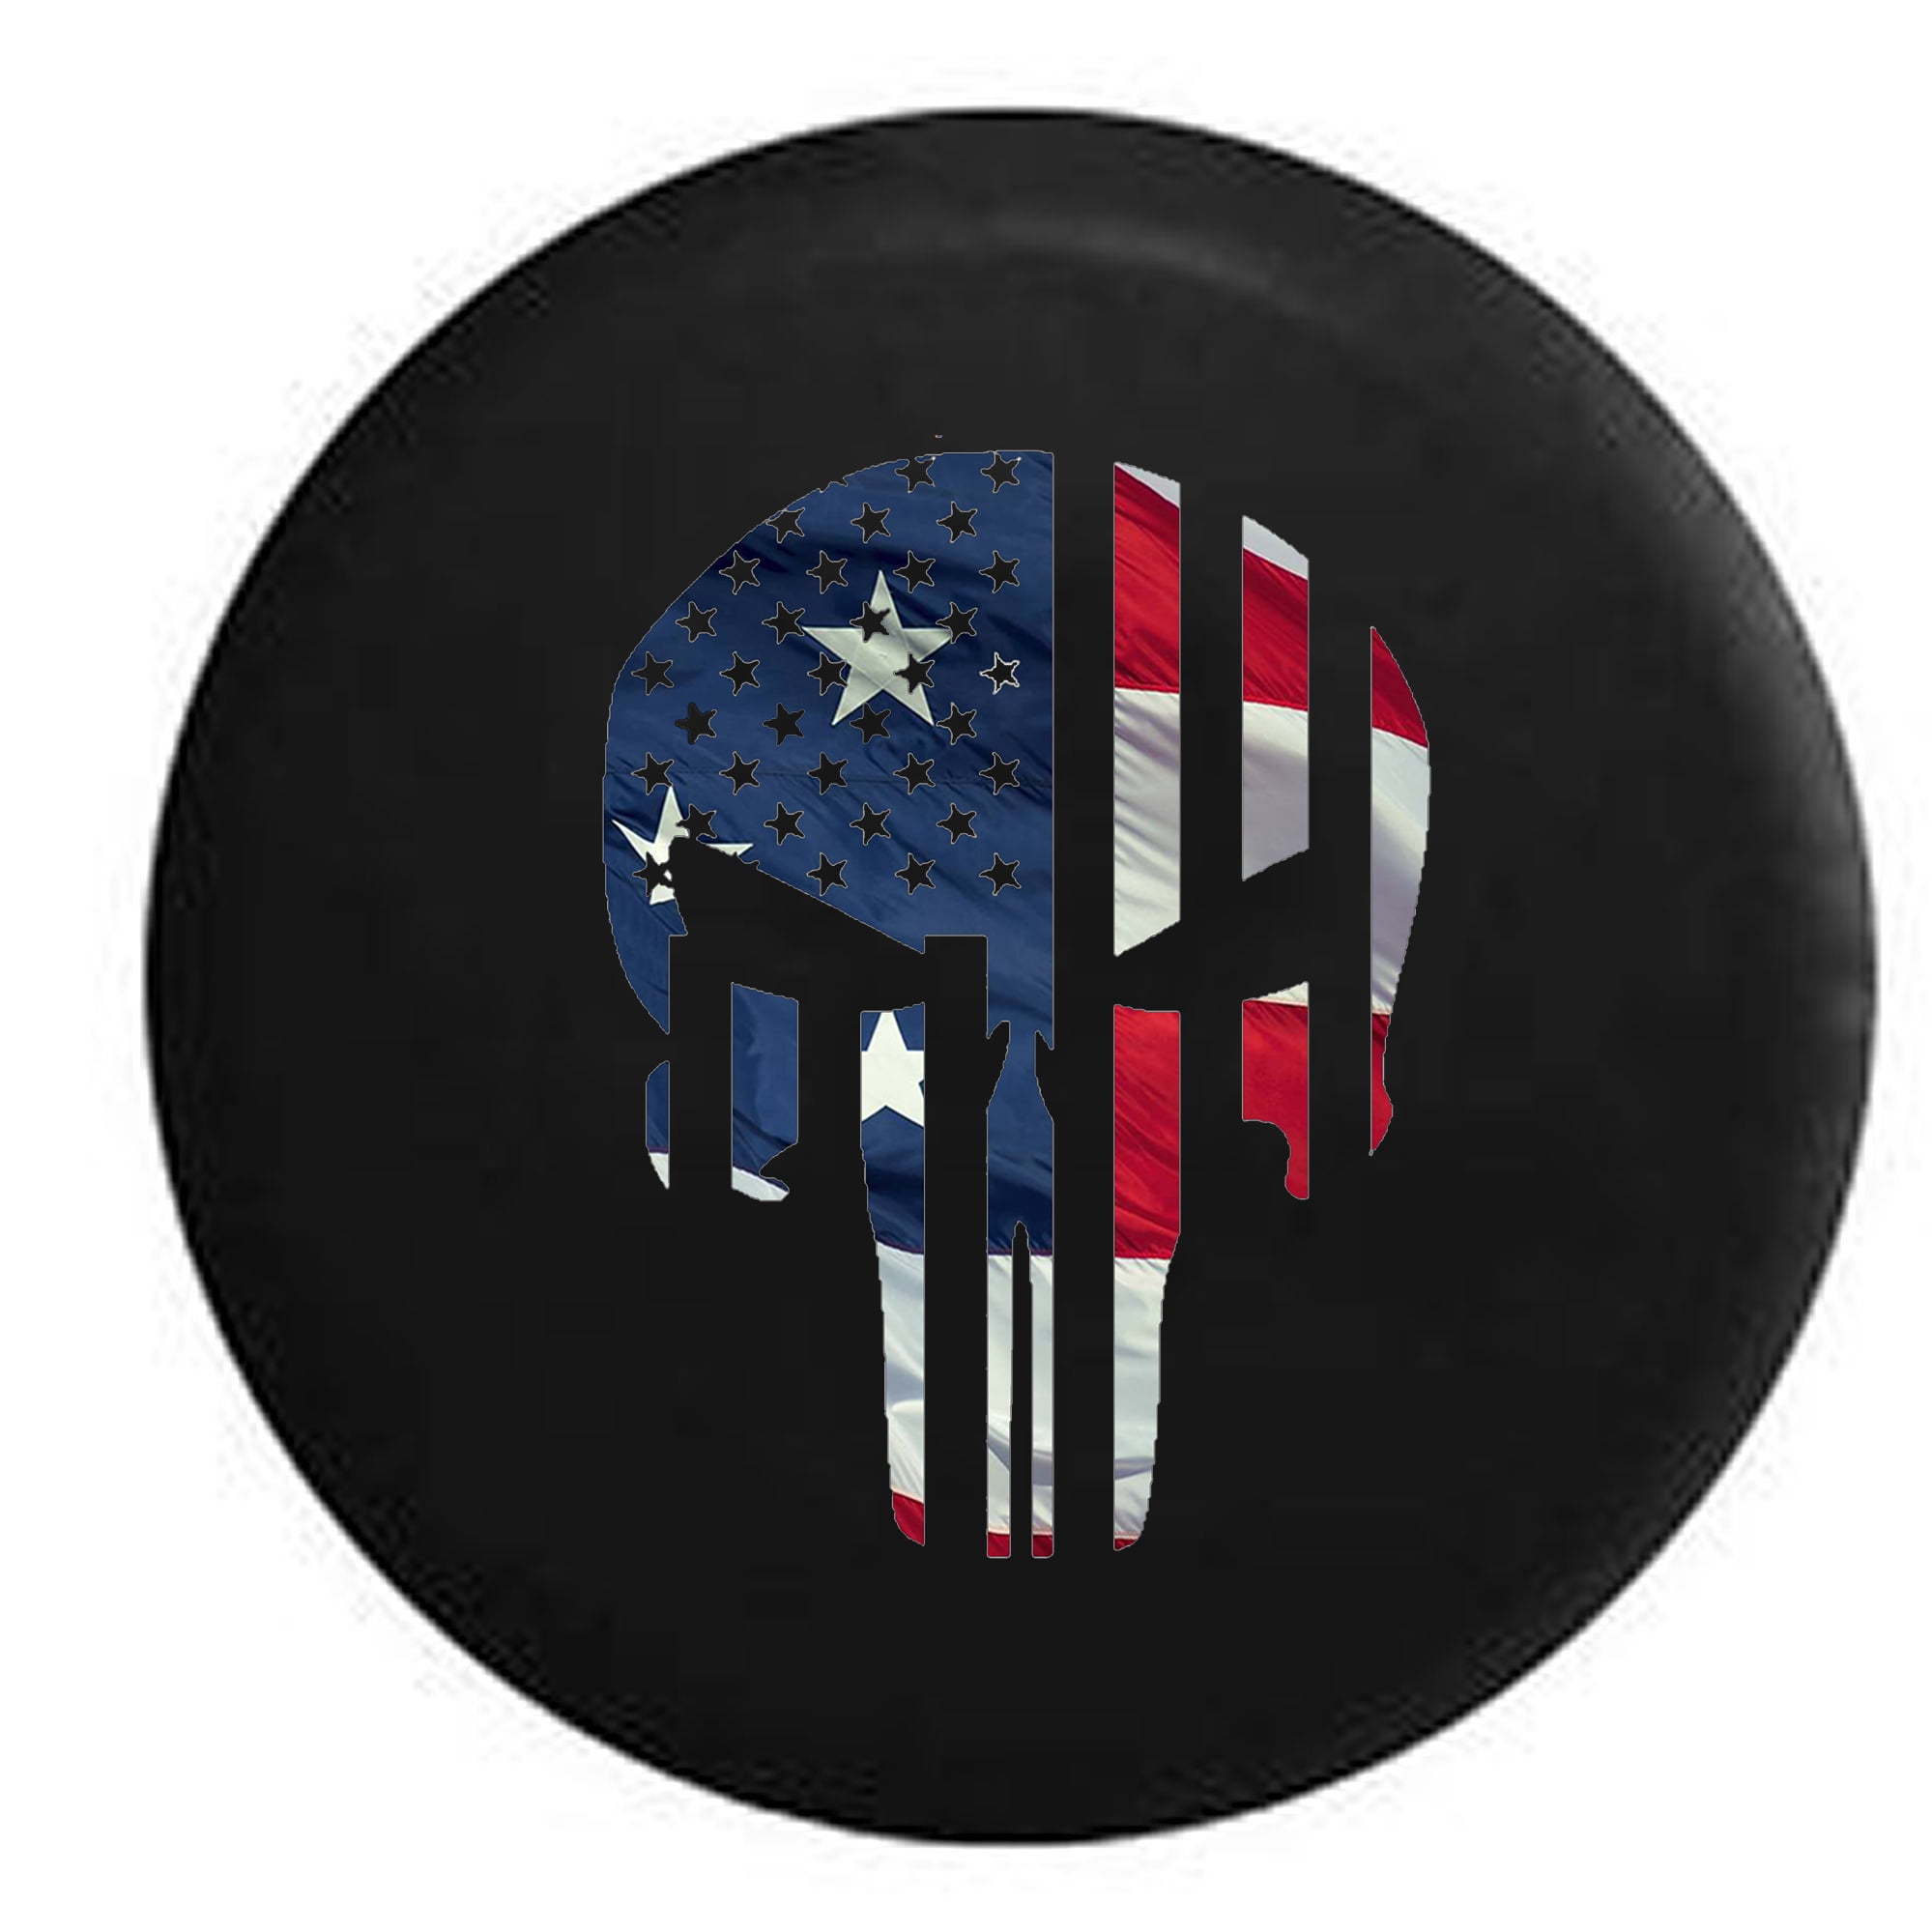 Car Tire Covers We The People American Flag Black 30 to 31 Inch - 4